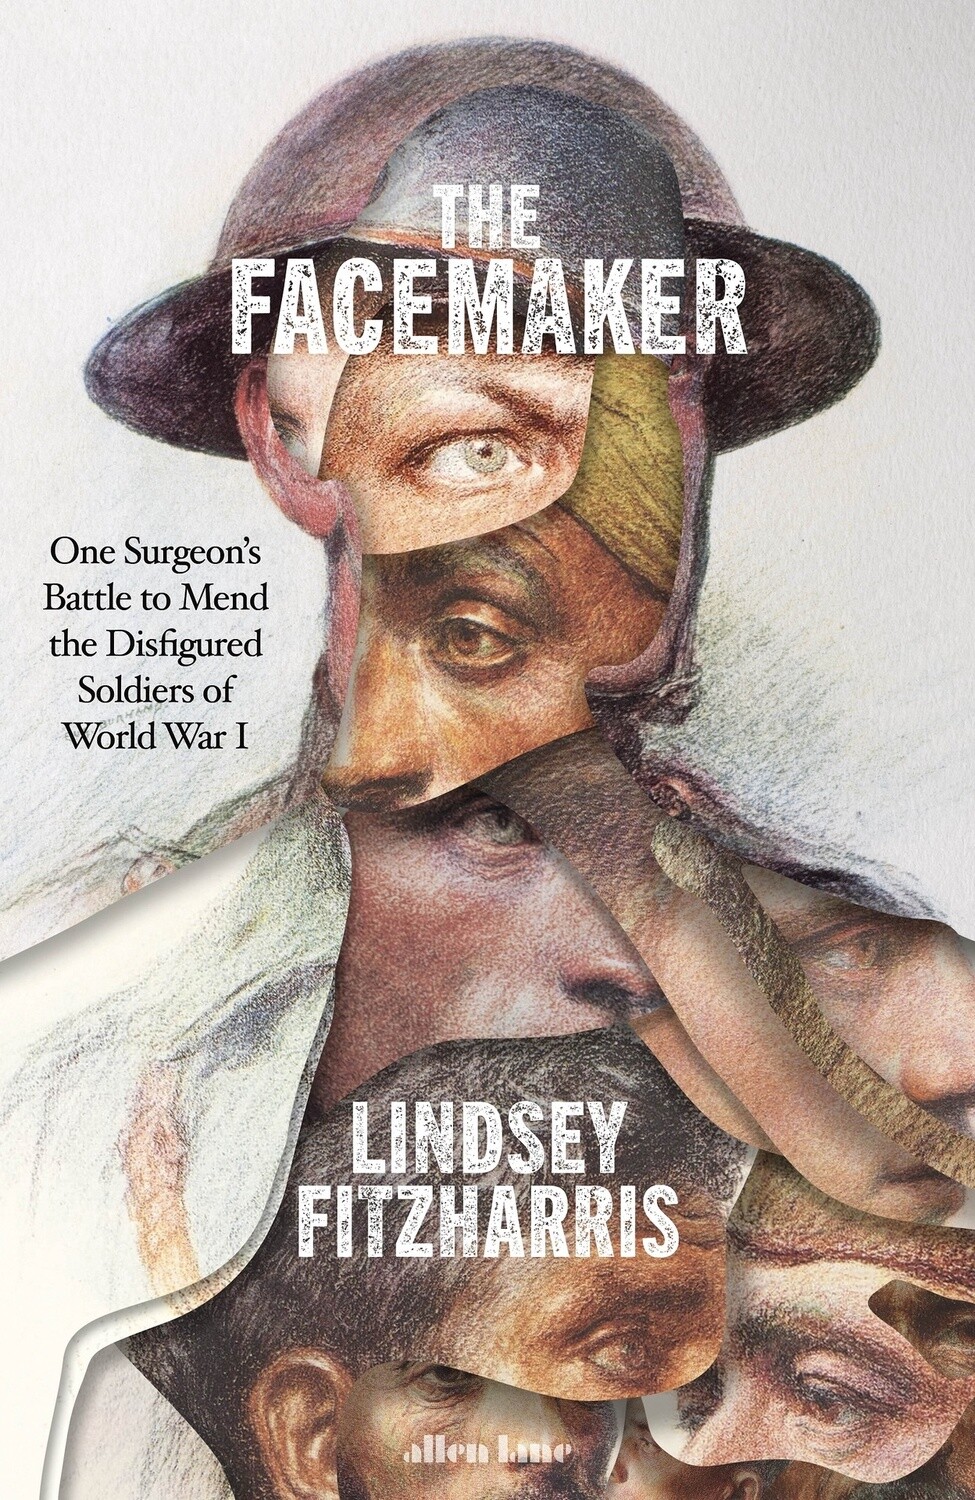 The Facemaker by Lindsey Fitzharris, Format: Hardback